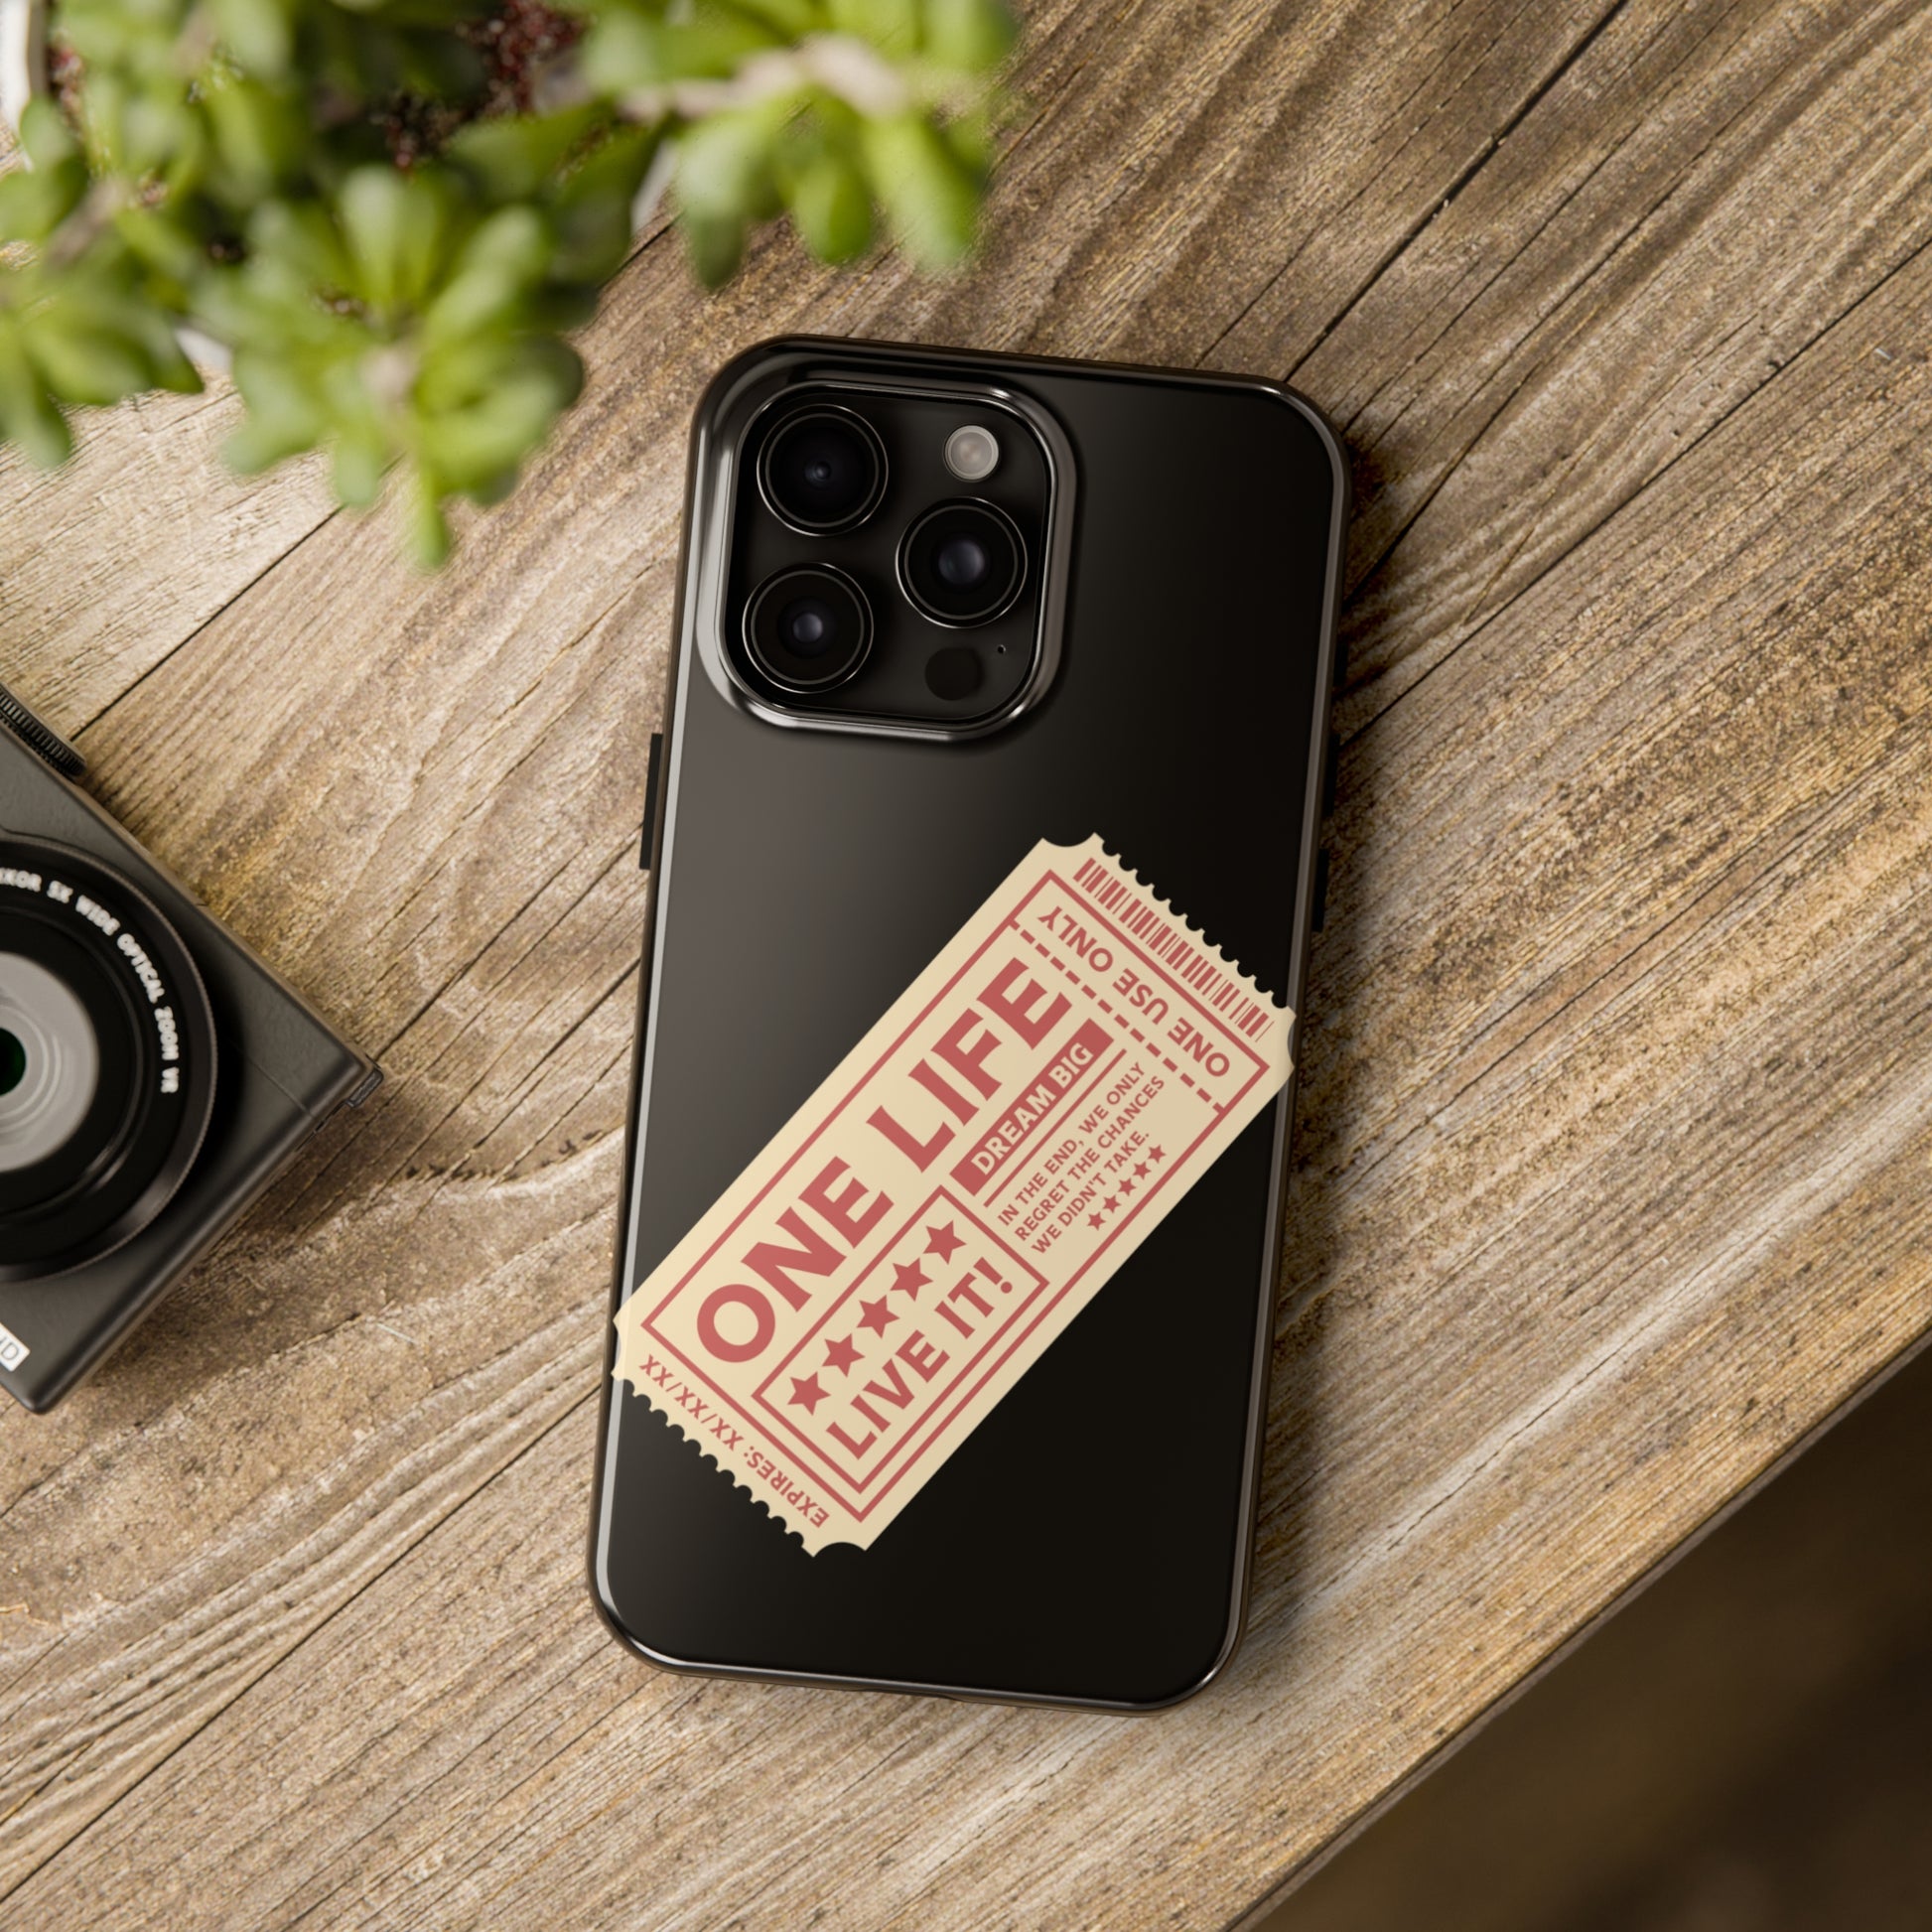 Ticket to Life: iPhone Tough Case Design - Wireless Charging - Superior Protection - Original Designs by TheGlassyLass.com